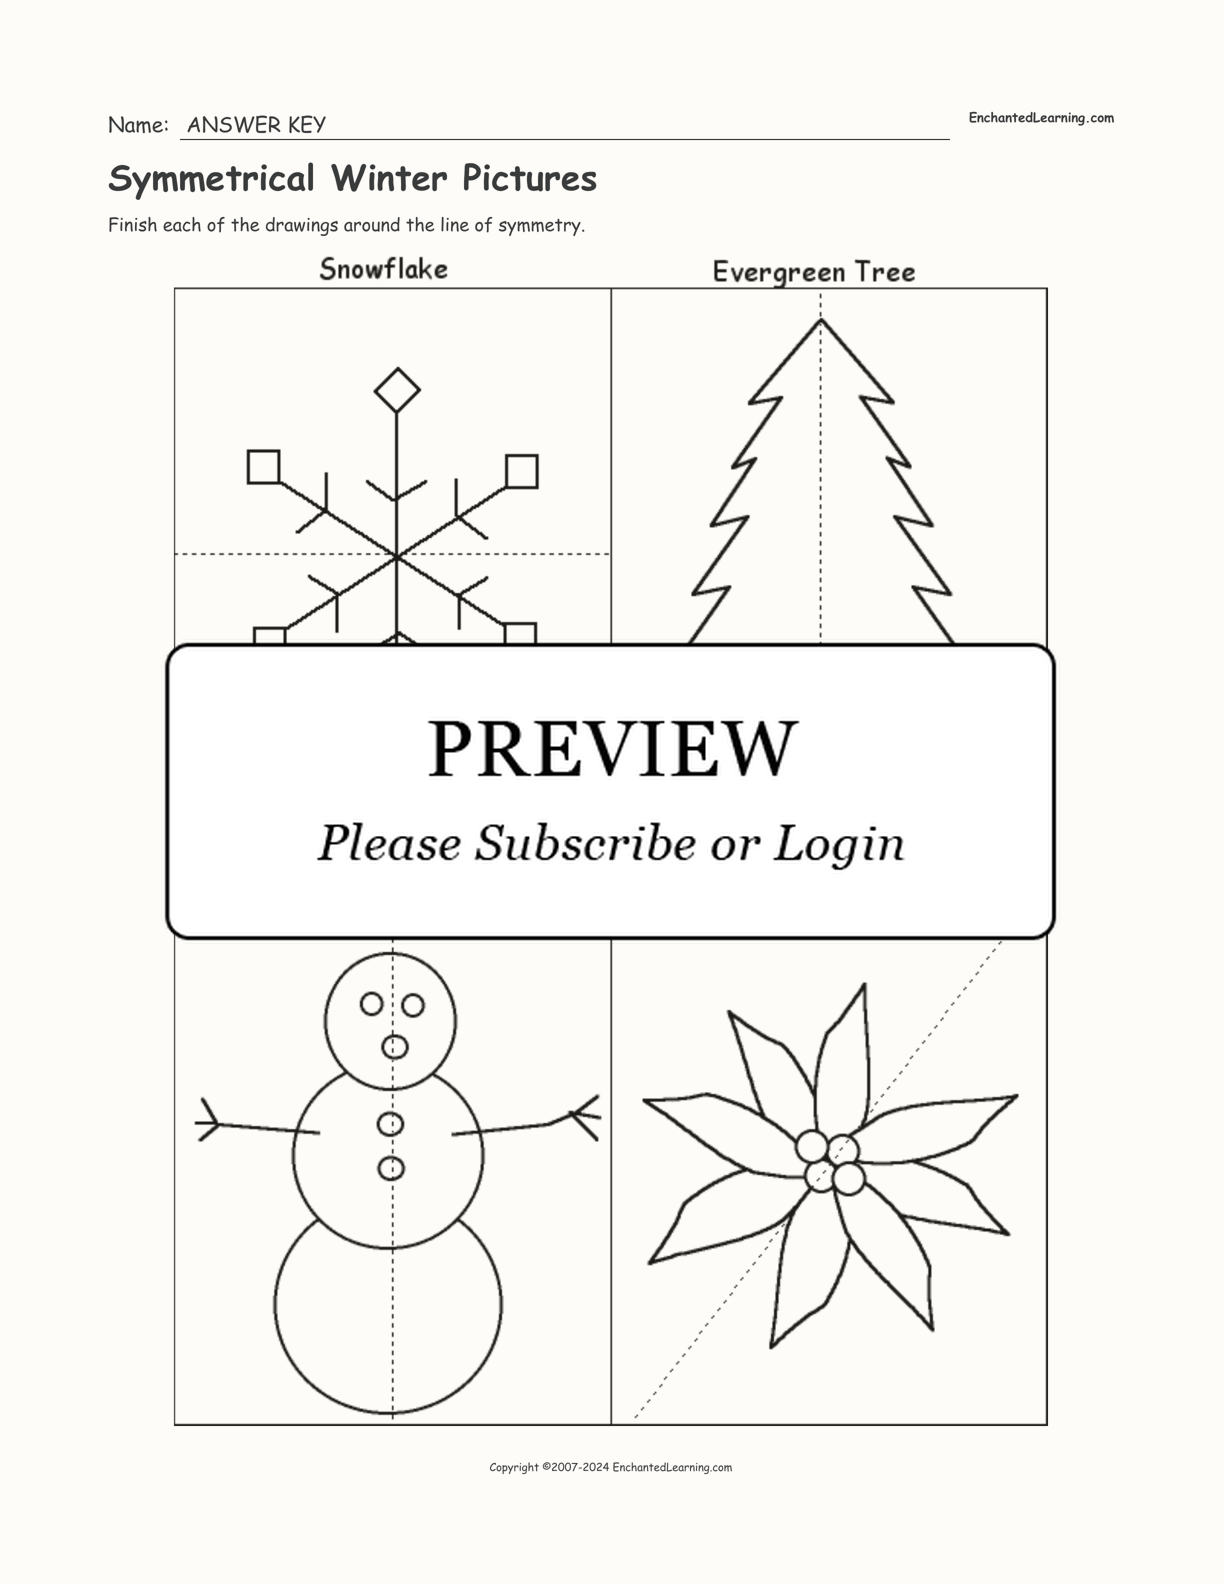 Symmetrical Winter Pictures interactive worksheet page 2